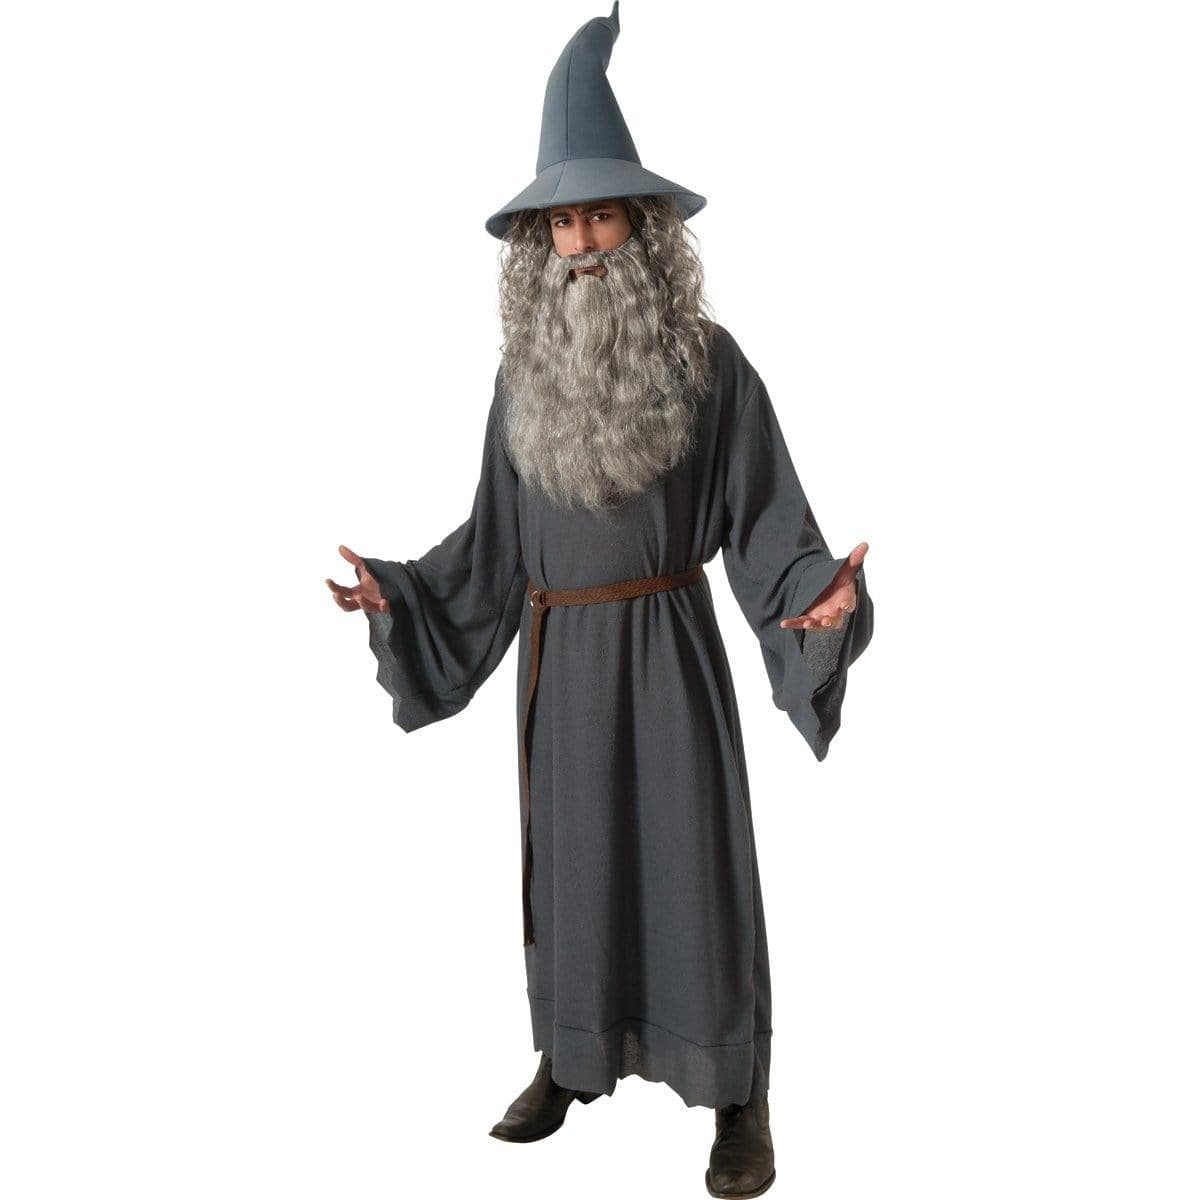 Buy Costumes Gandalf Costume for Adults, The Hobbit sold at Party Expert